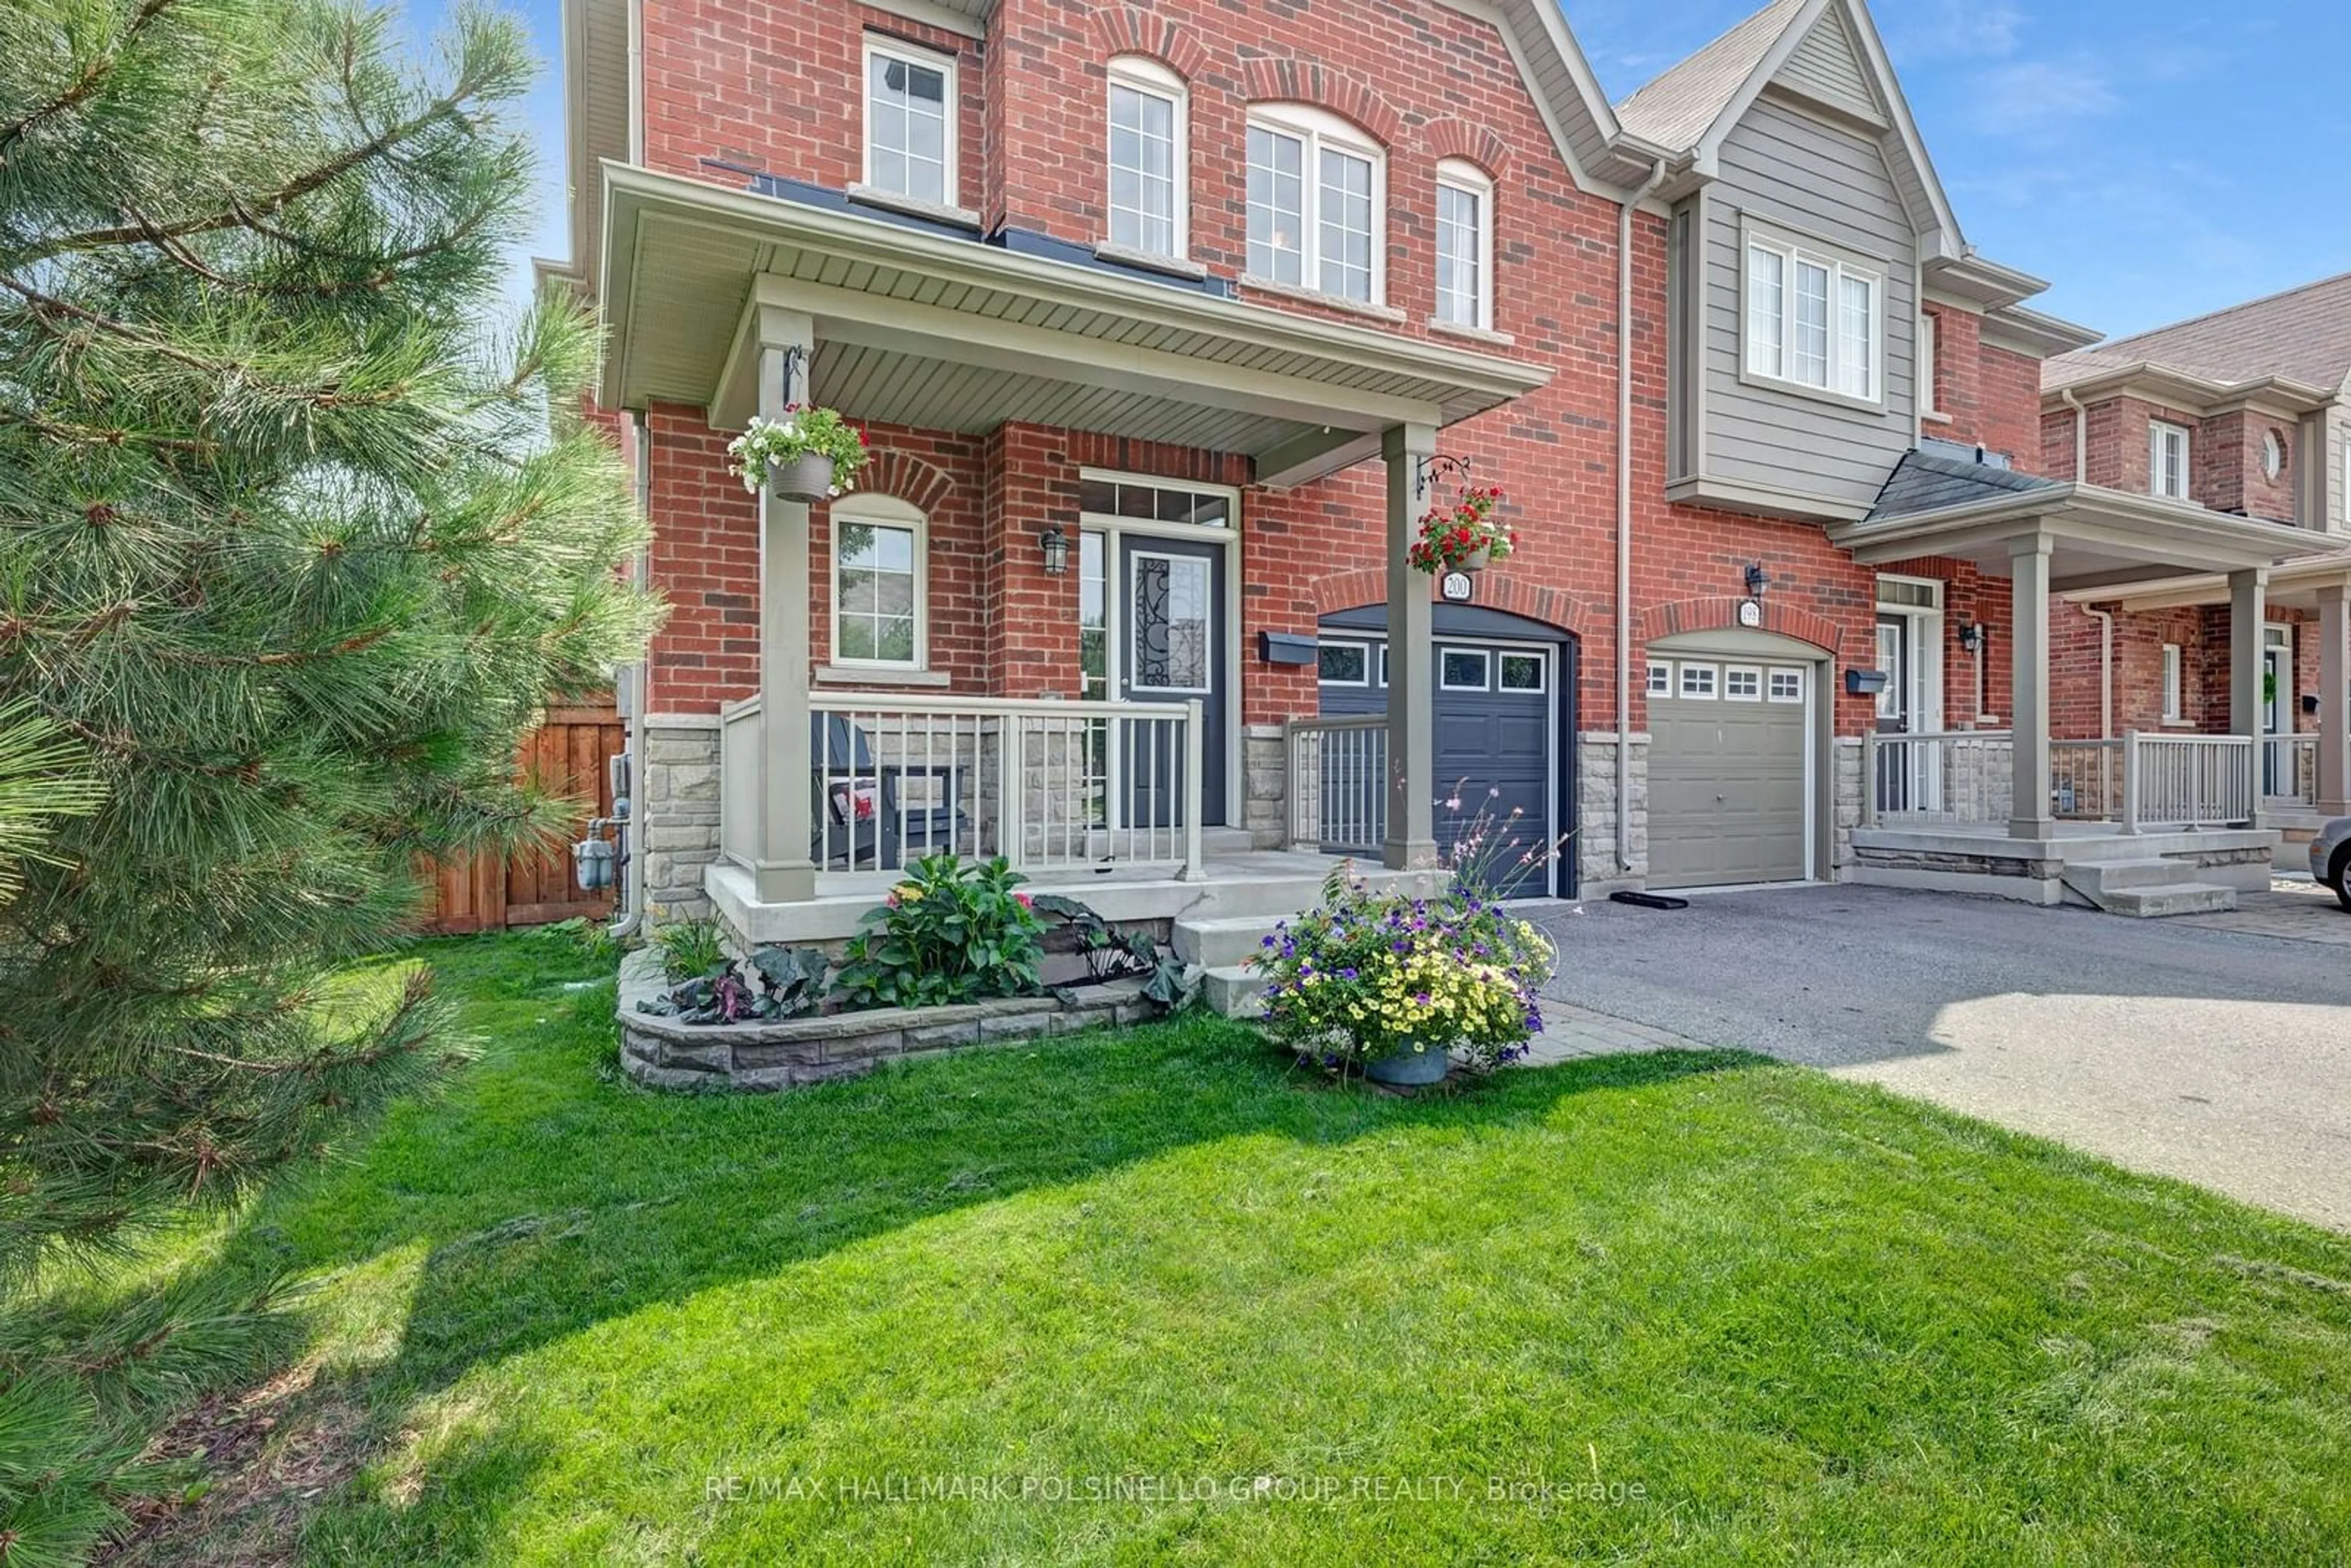 Home with brick exterior material for 200 Lewis Honey Dr, Aurora Ontario L4G 0R8